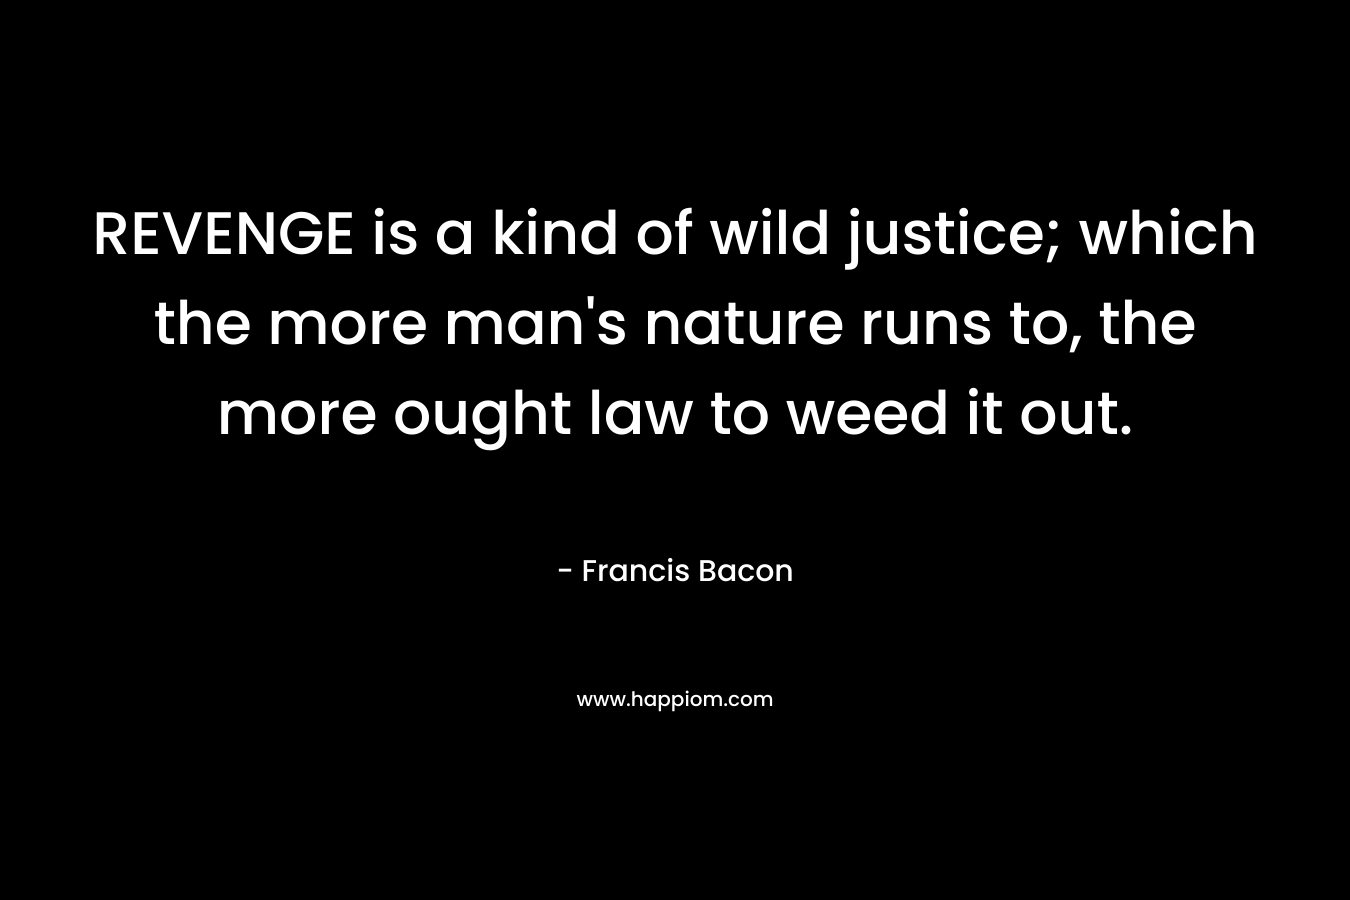 REVENGE is a kind of wild justice; which the more man’s nature runs to, the more ought law to weed it out. – Francis Bacon